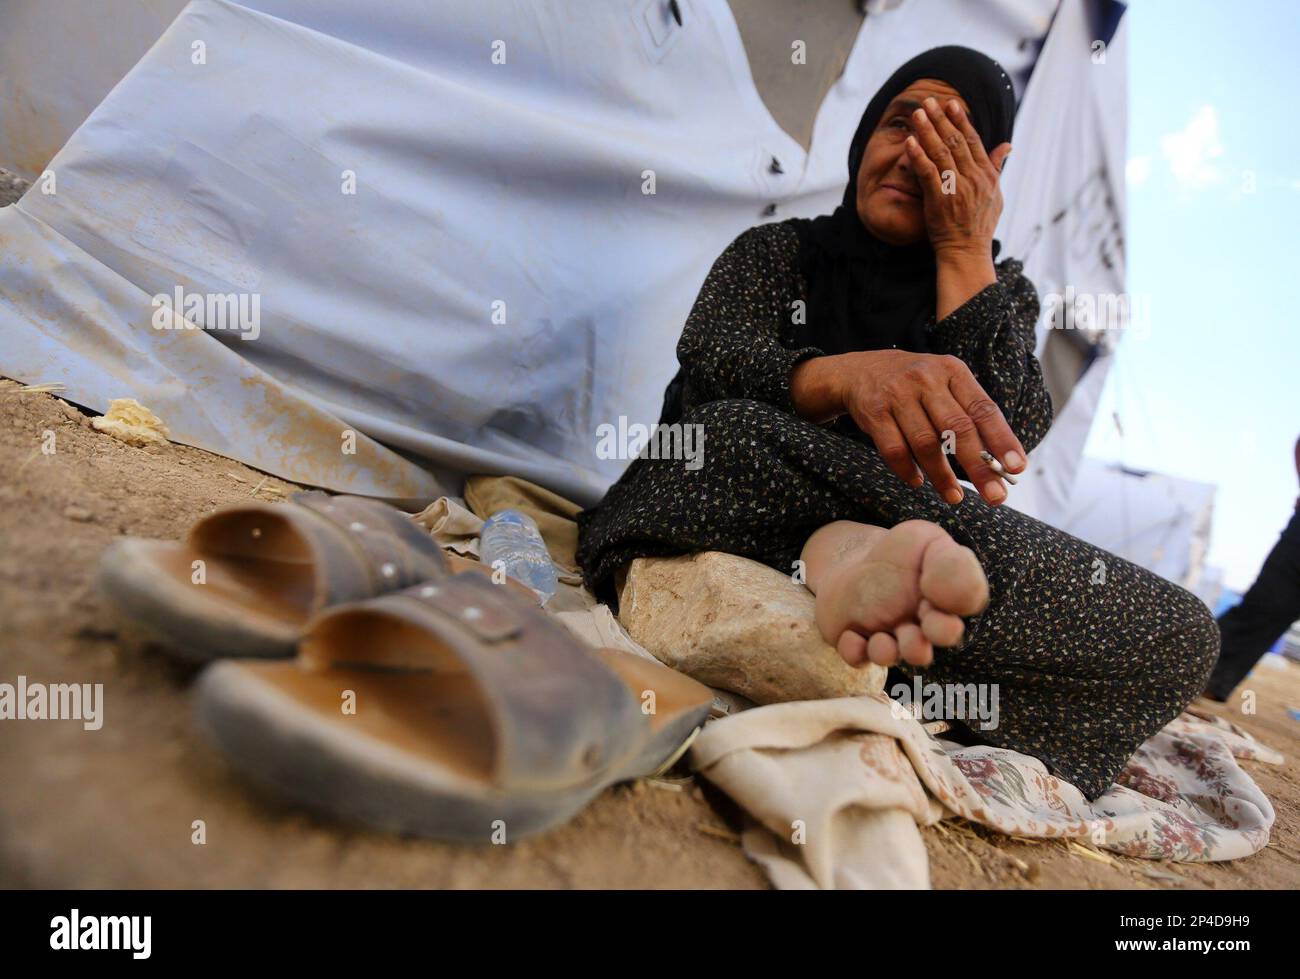 An Iraqi refugee woman from Mosul sits outside her family's tent at Khazir refugee camp outside Irbil, 217 miles (350 kilometers) north of Baghdad, Iraq, Friday, June 13, 2014. The Islamic State of Iraq and the Levant, the al-Qaida breakaway group, on Monday and Tuesday took over much of Mosul in Iraq and then swept into the city of Tikrit further south. An estimated half a million residents fled Mosul, the economically important city. (AP Photo) Stock Photo